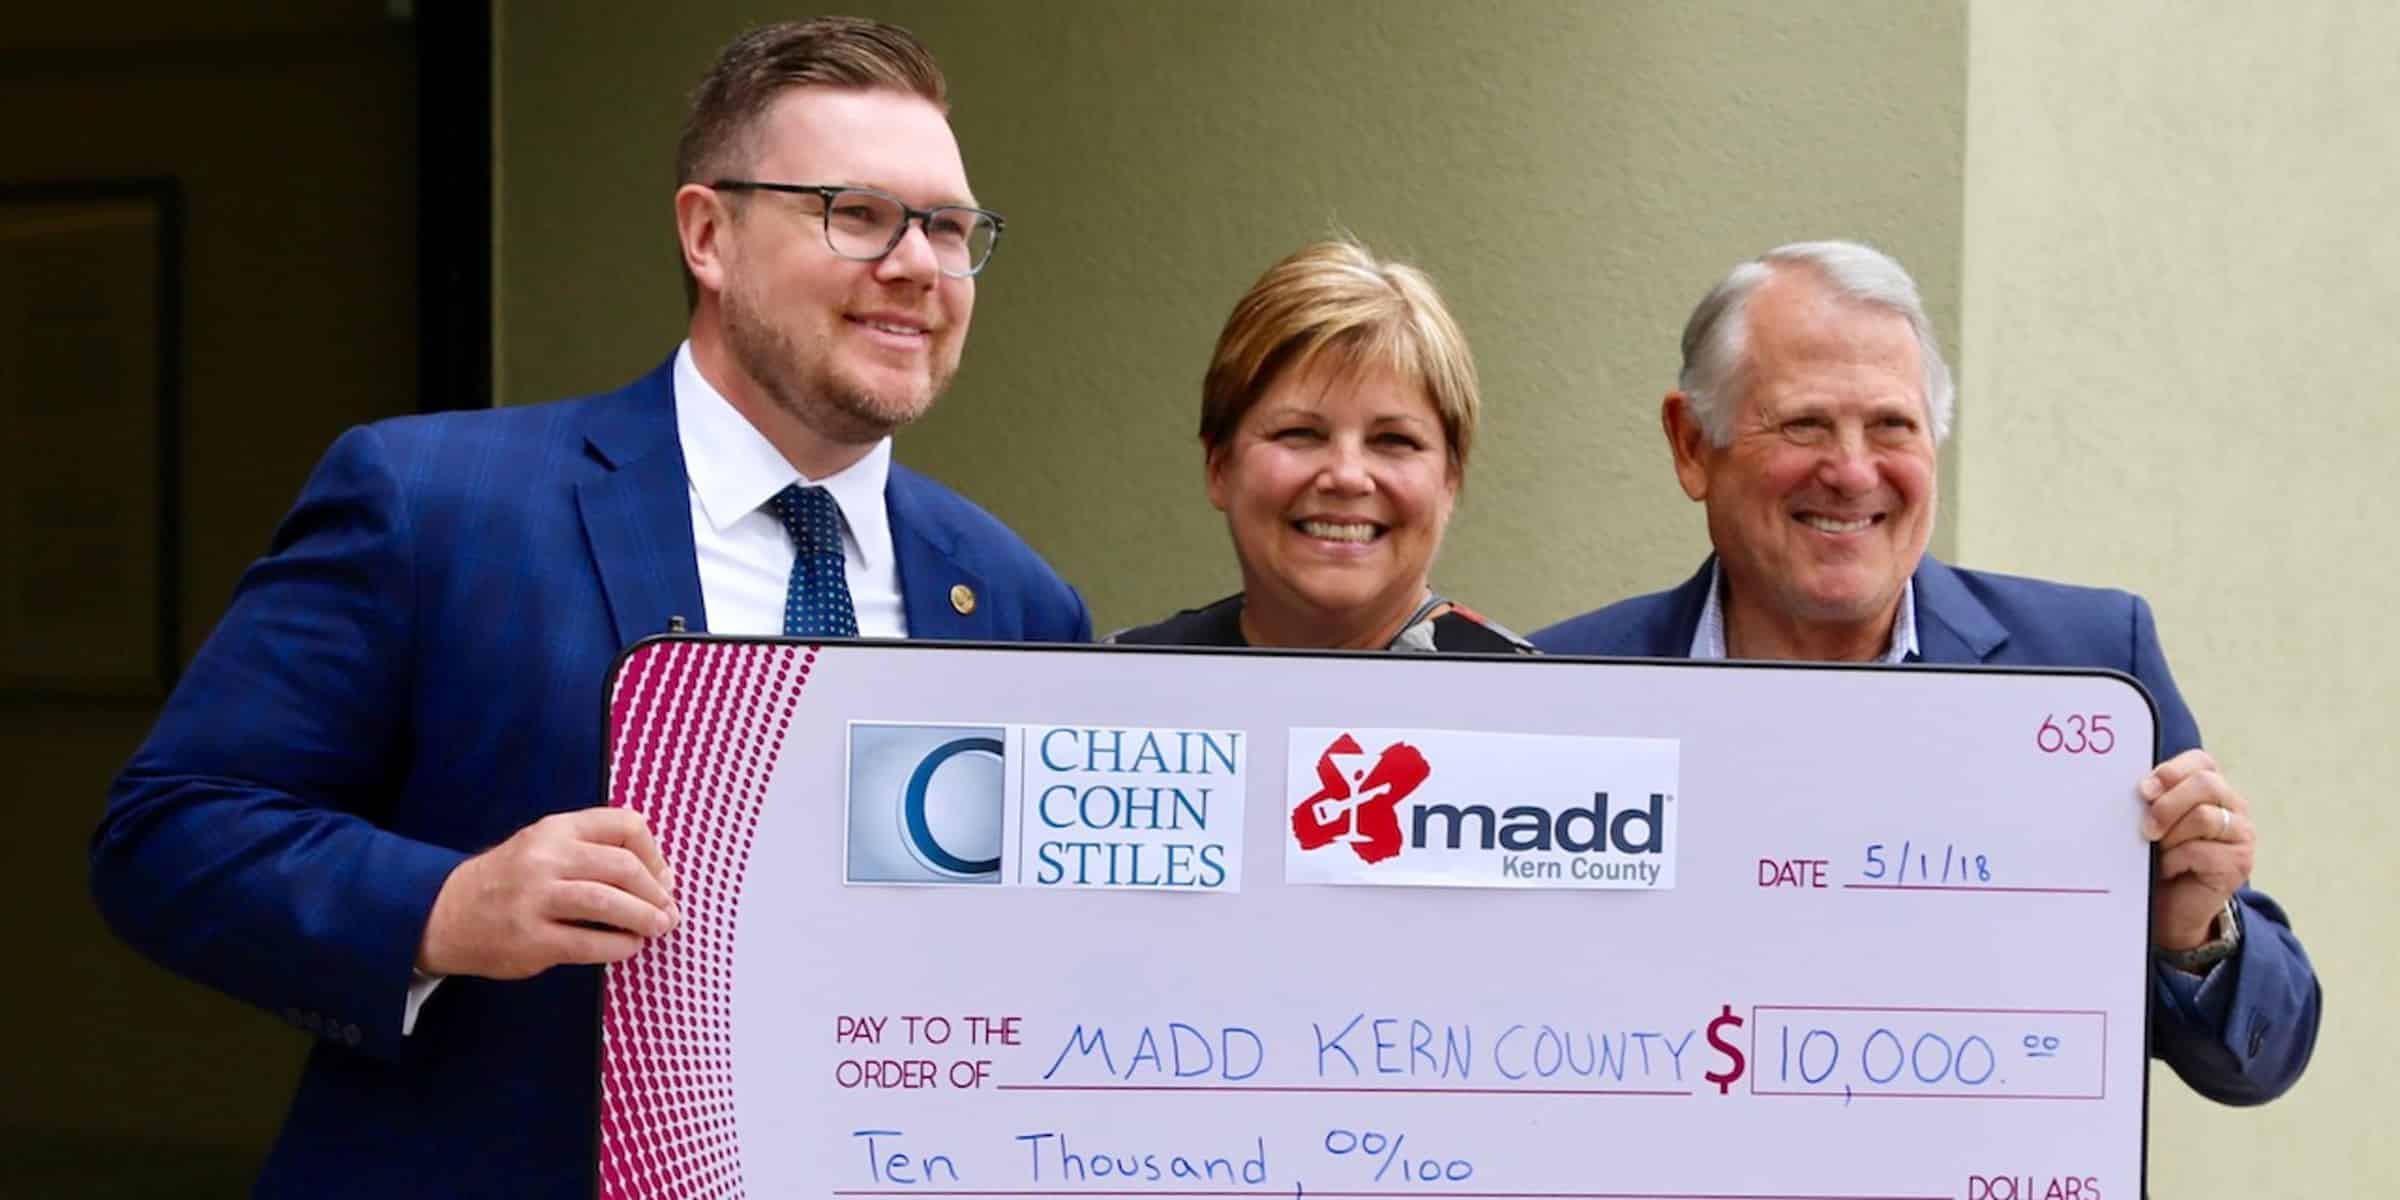 Chain | Cohn | Clark ‘gives big’ to local nonprofits in Kern County’s giving event